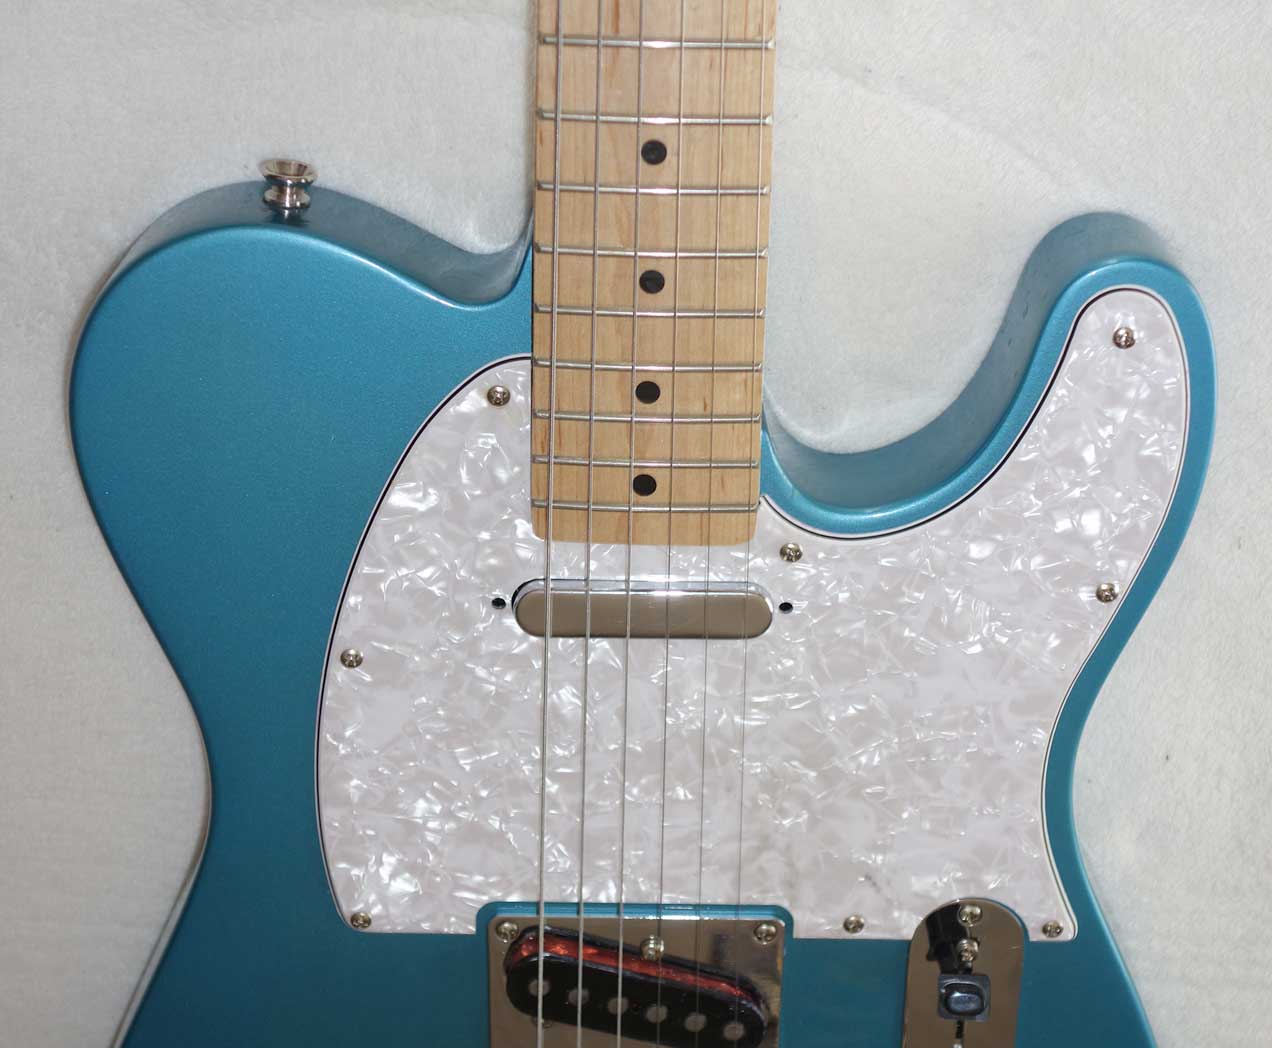 Used Partscaster Vintage 50s-Style Blue Telecaster, Maple Neck, Warmouth Pickguard w/Rio Grande "Halfbreed" Bridge PUP, 2004 Fender MIM "Special Edition" Neck PUP